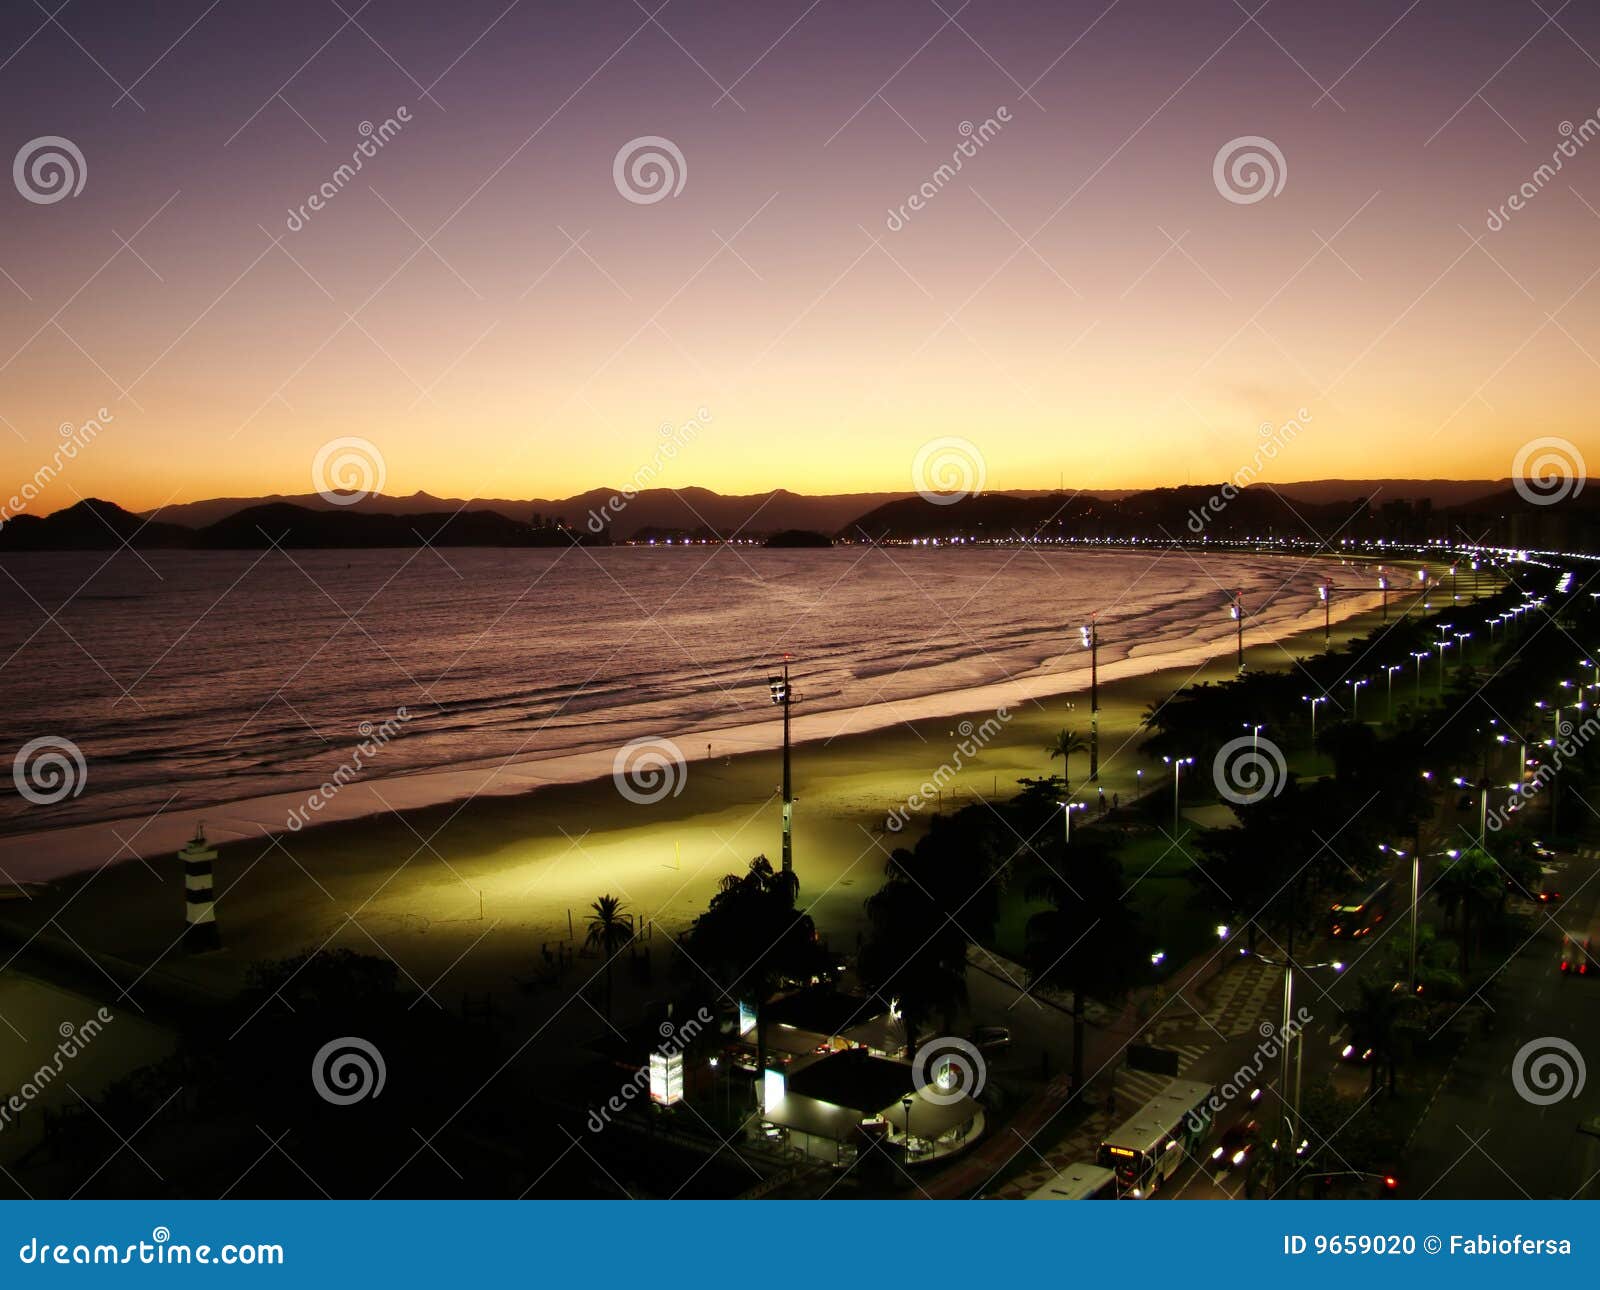 coast view of the city of santos in brazil